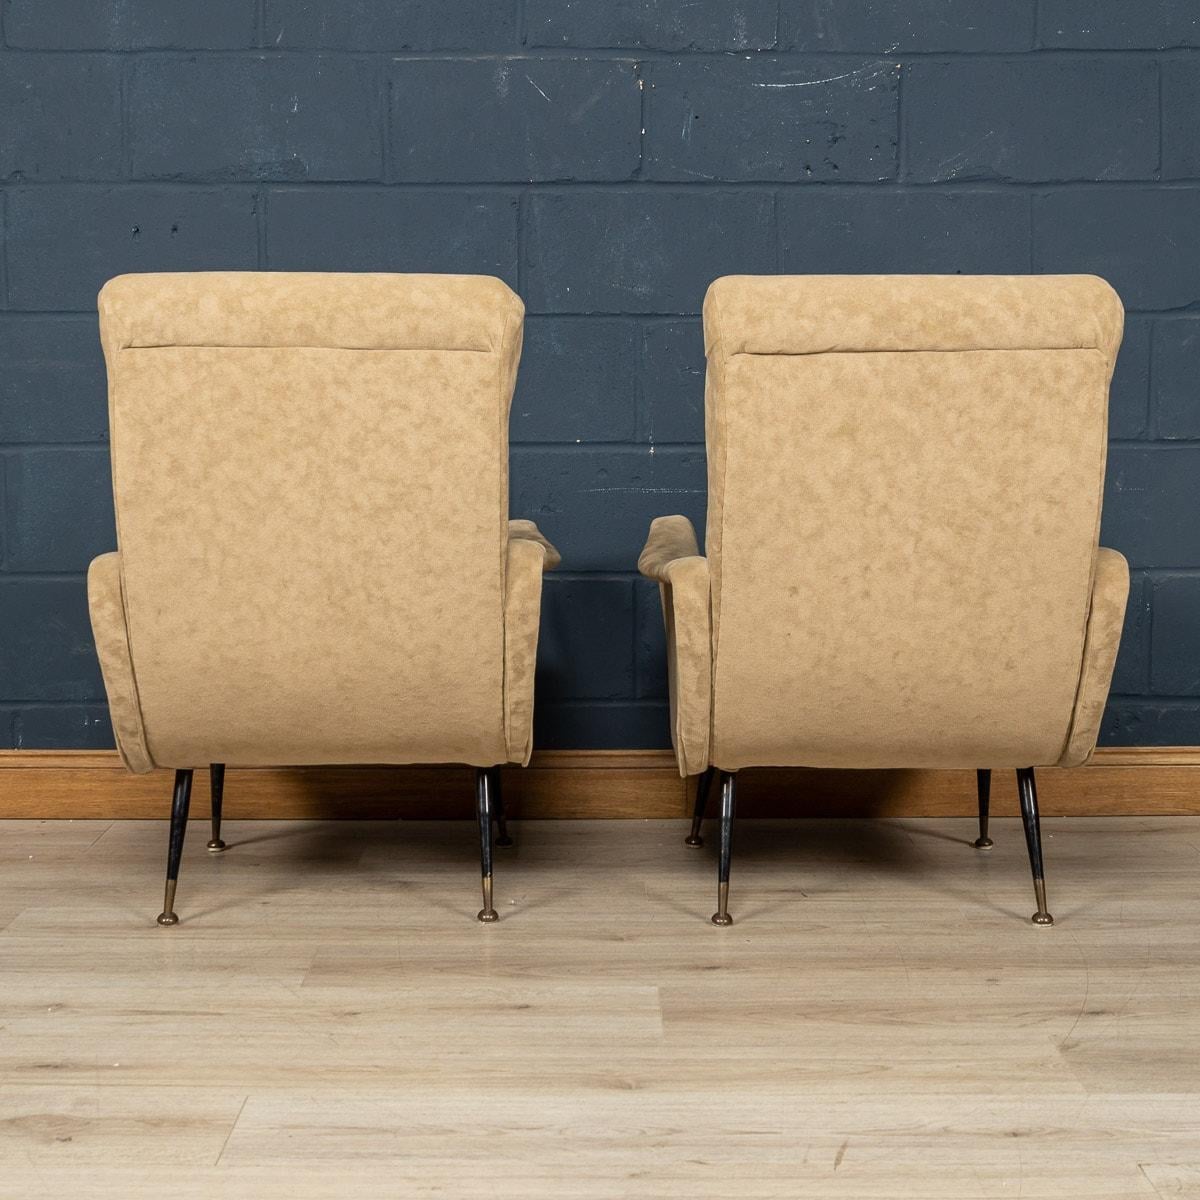 20th Century A Pair Of Italian Armchairs In The Style Of Marco Zanuso, c.1960